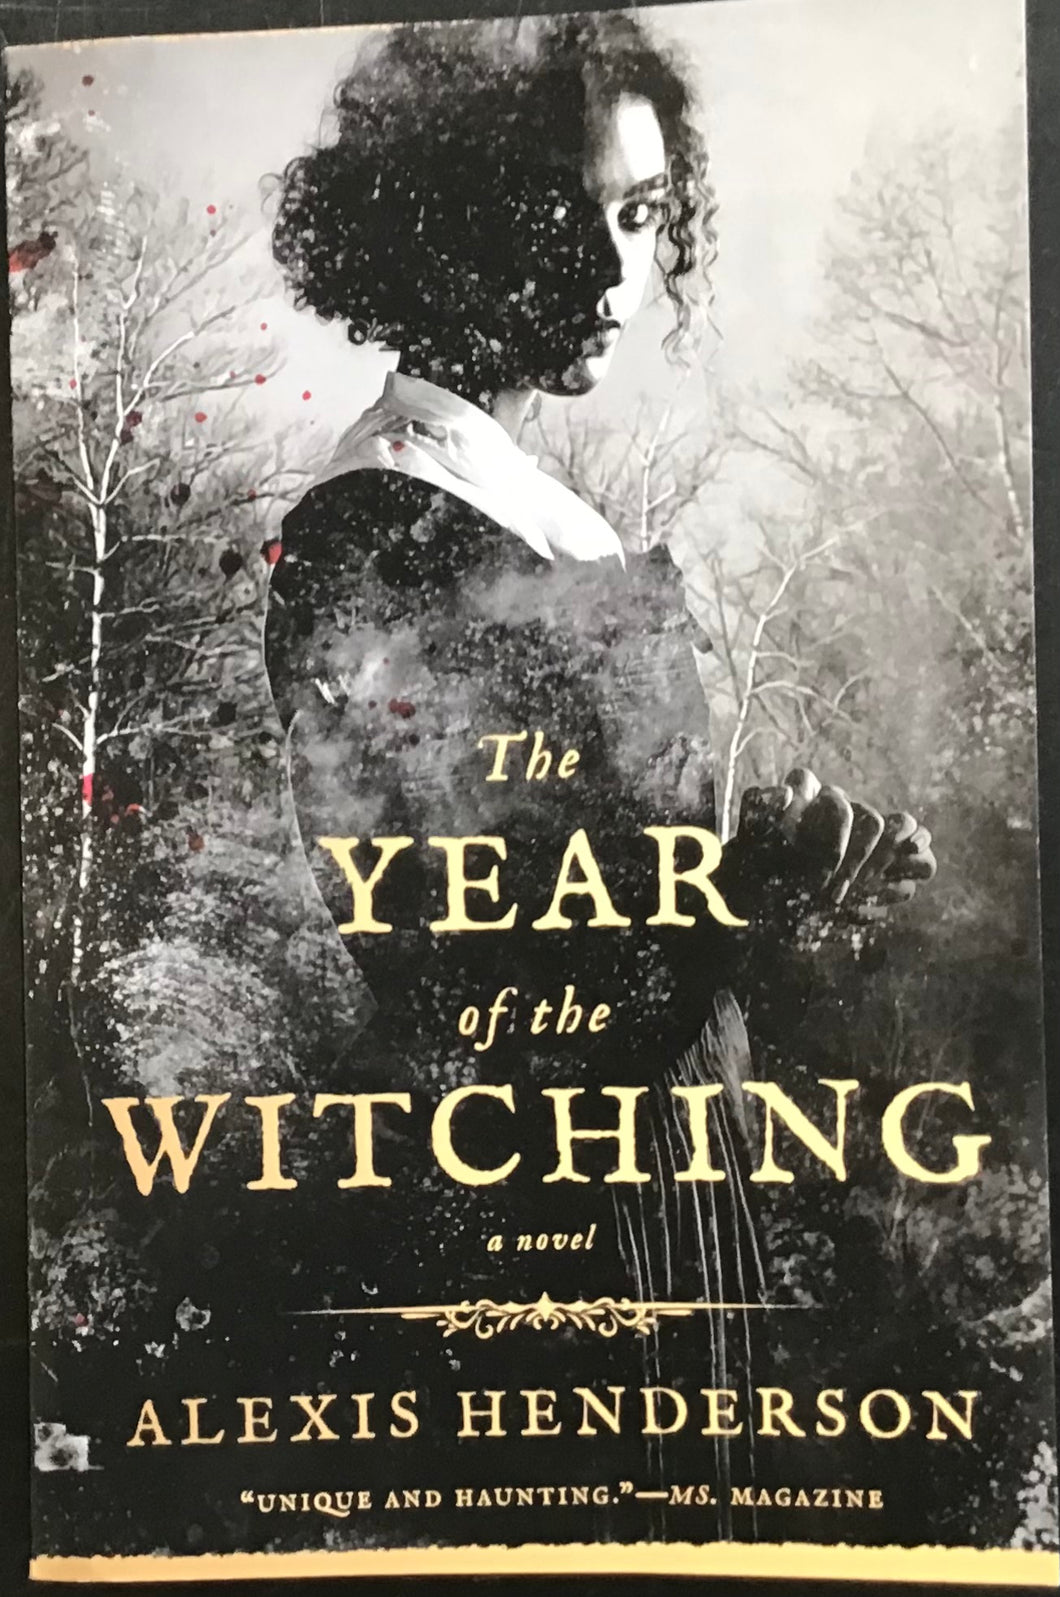 The Year of the Witching, Alexis Henderson